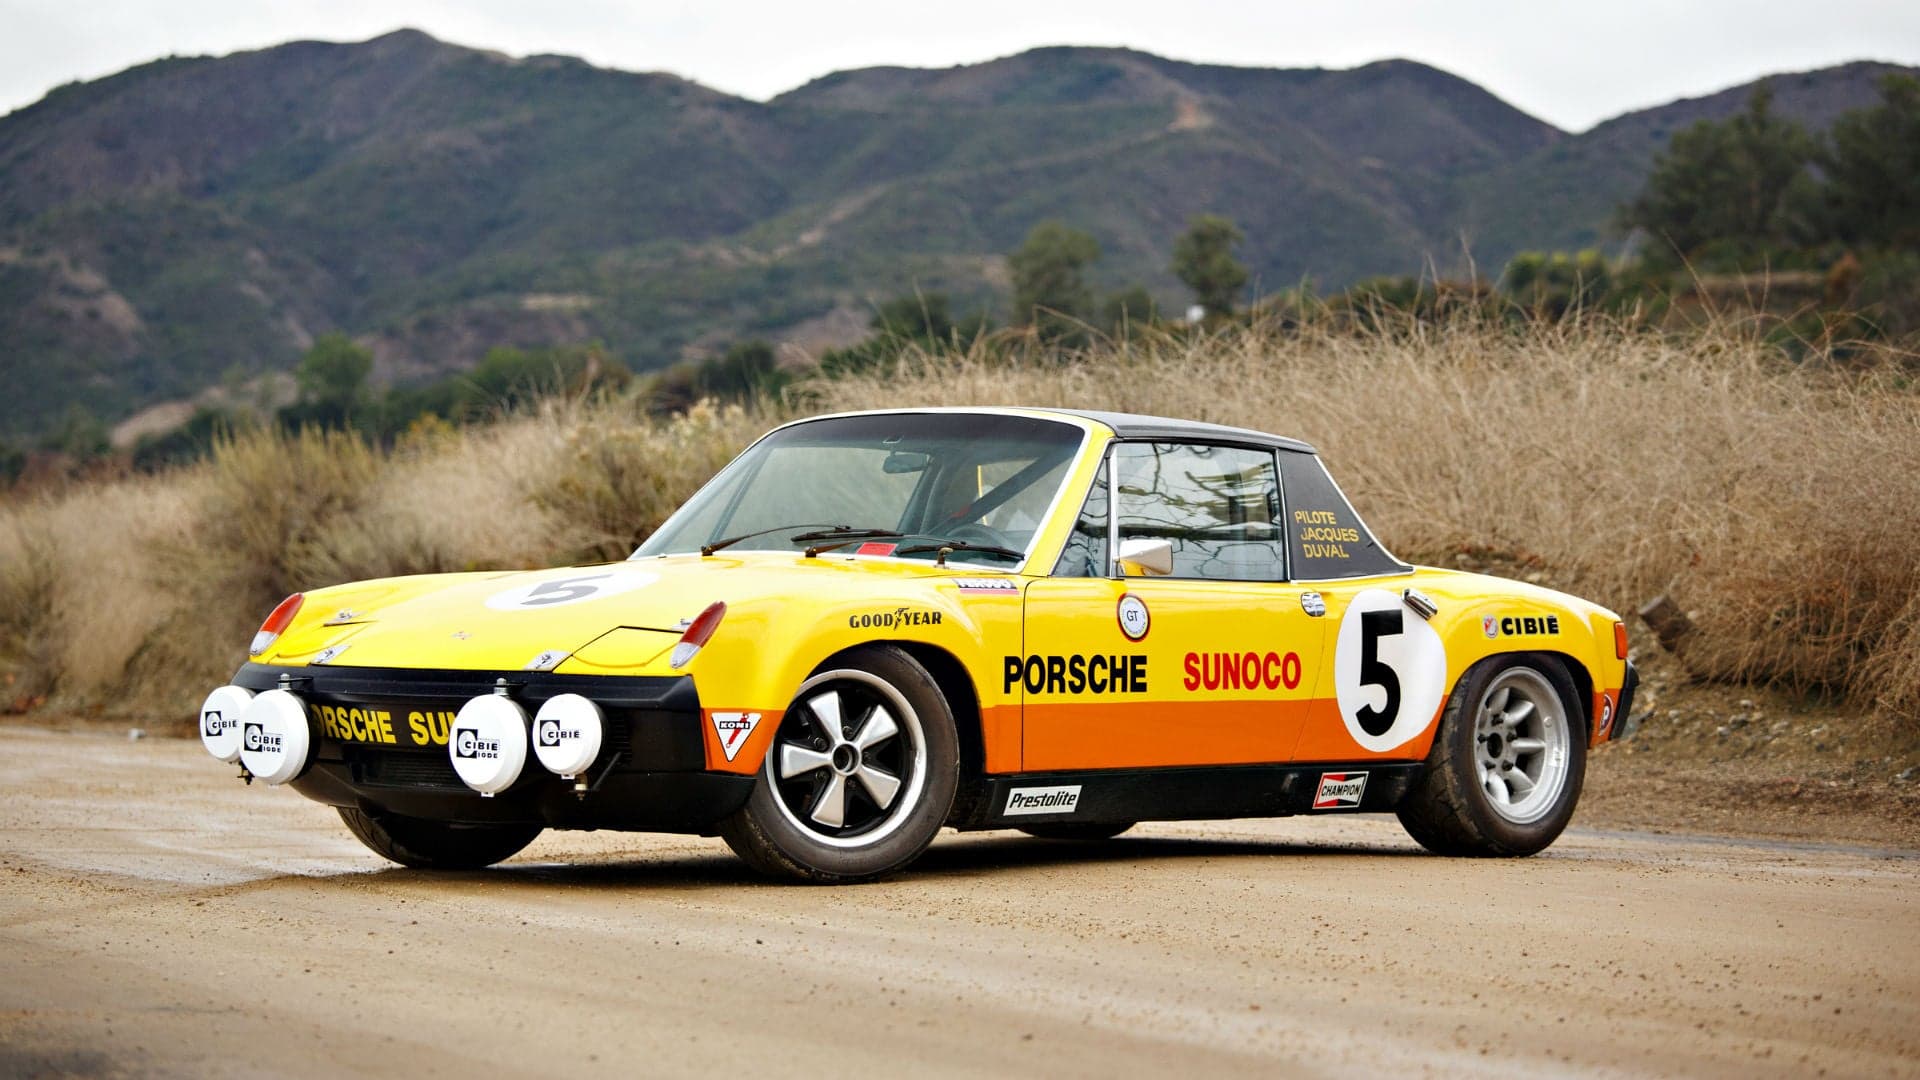 1970 Porsche 914/6 GT Sold for $1M at Auction Becomes Most Expensive 914 Ever